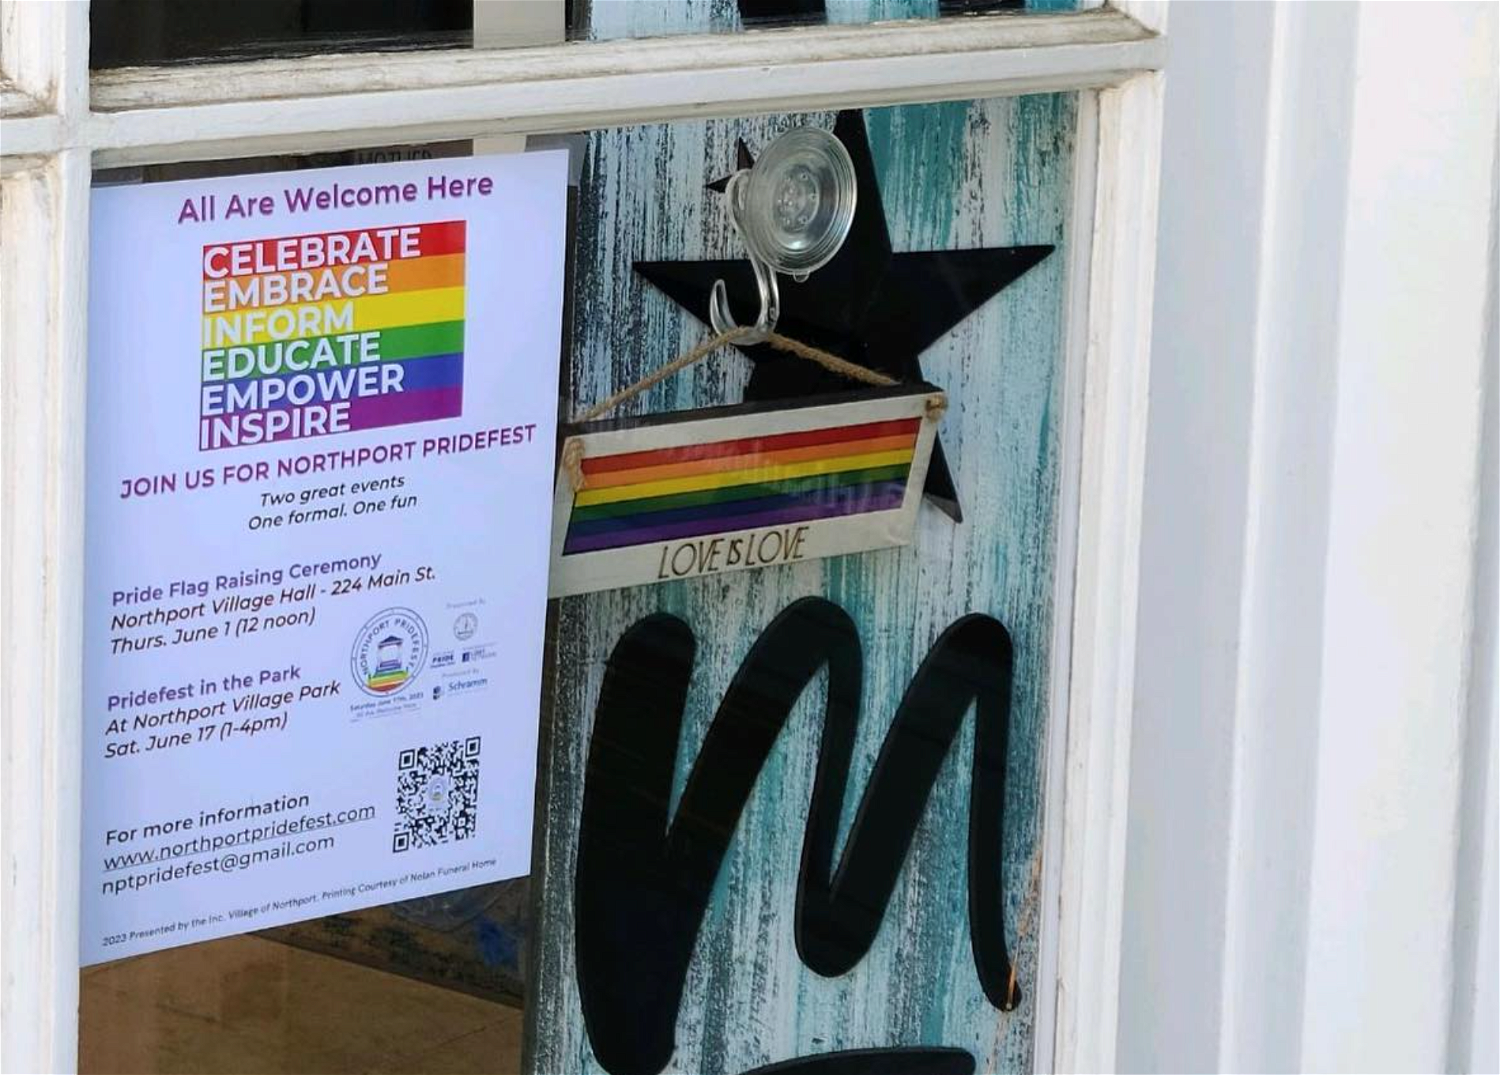 In anticipation of anchor events throughout the month of June, storefronts in Northport Village have been promoting a key message of Pridefest: All are welcome here.